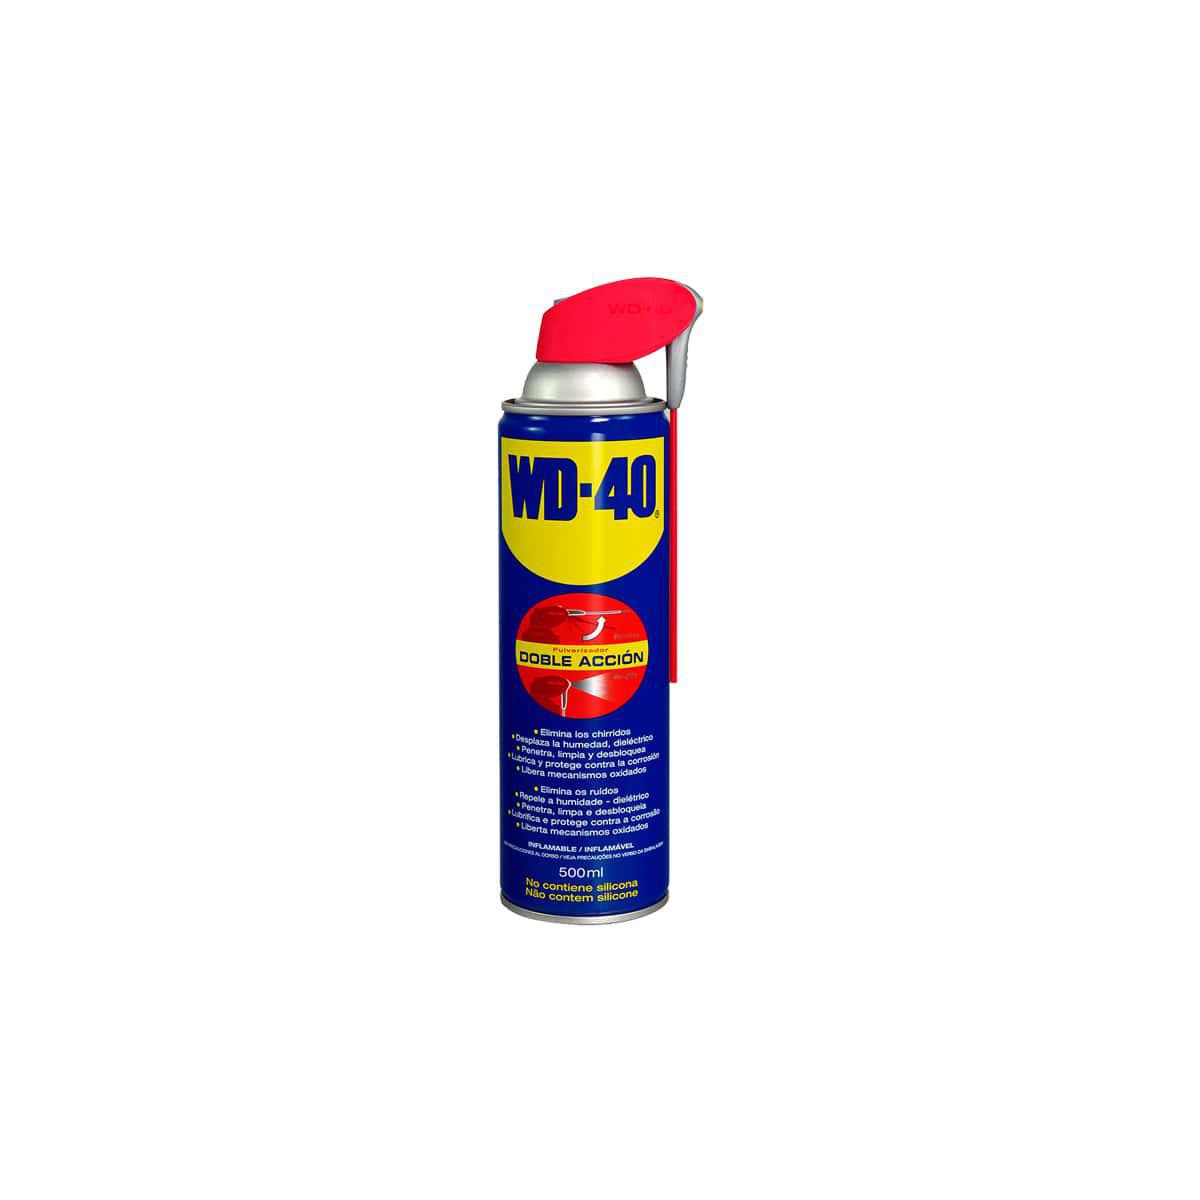 Wd40 - Huile lubrifiant WD40 spray 500ml - Mastic, silicone, joint